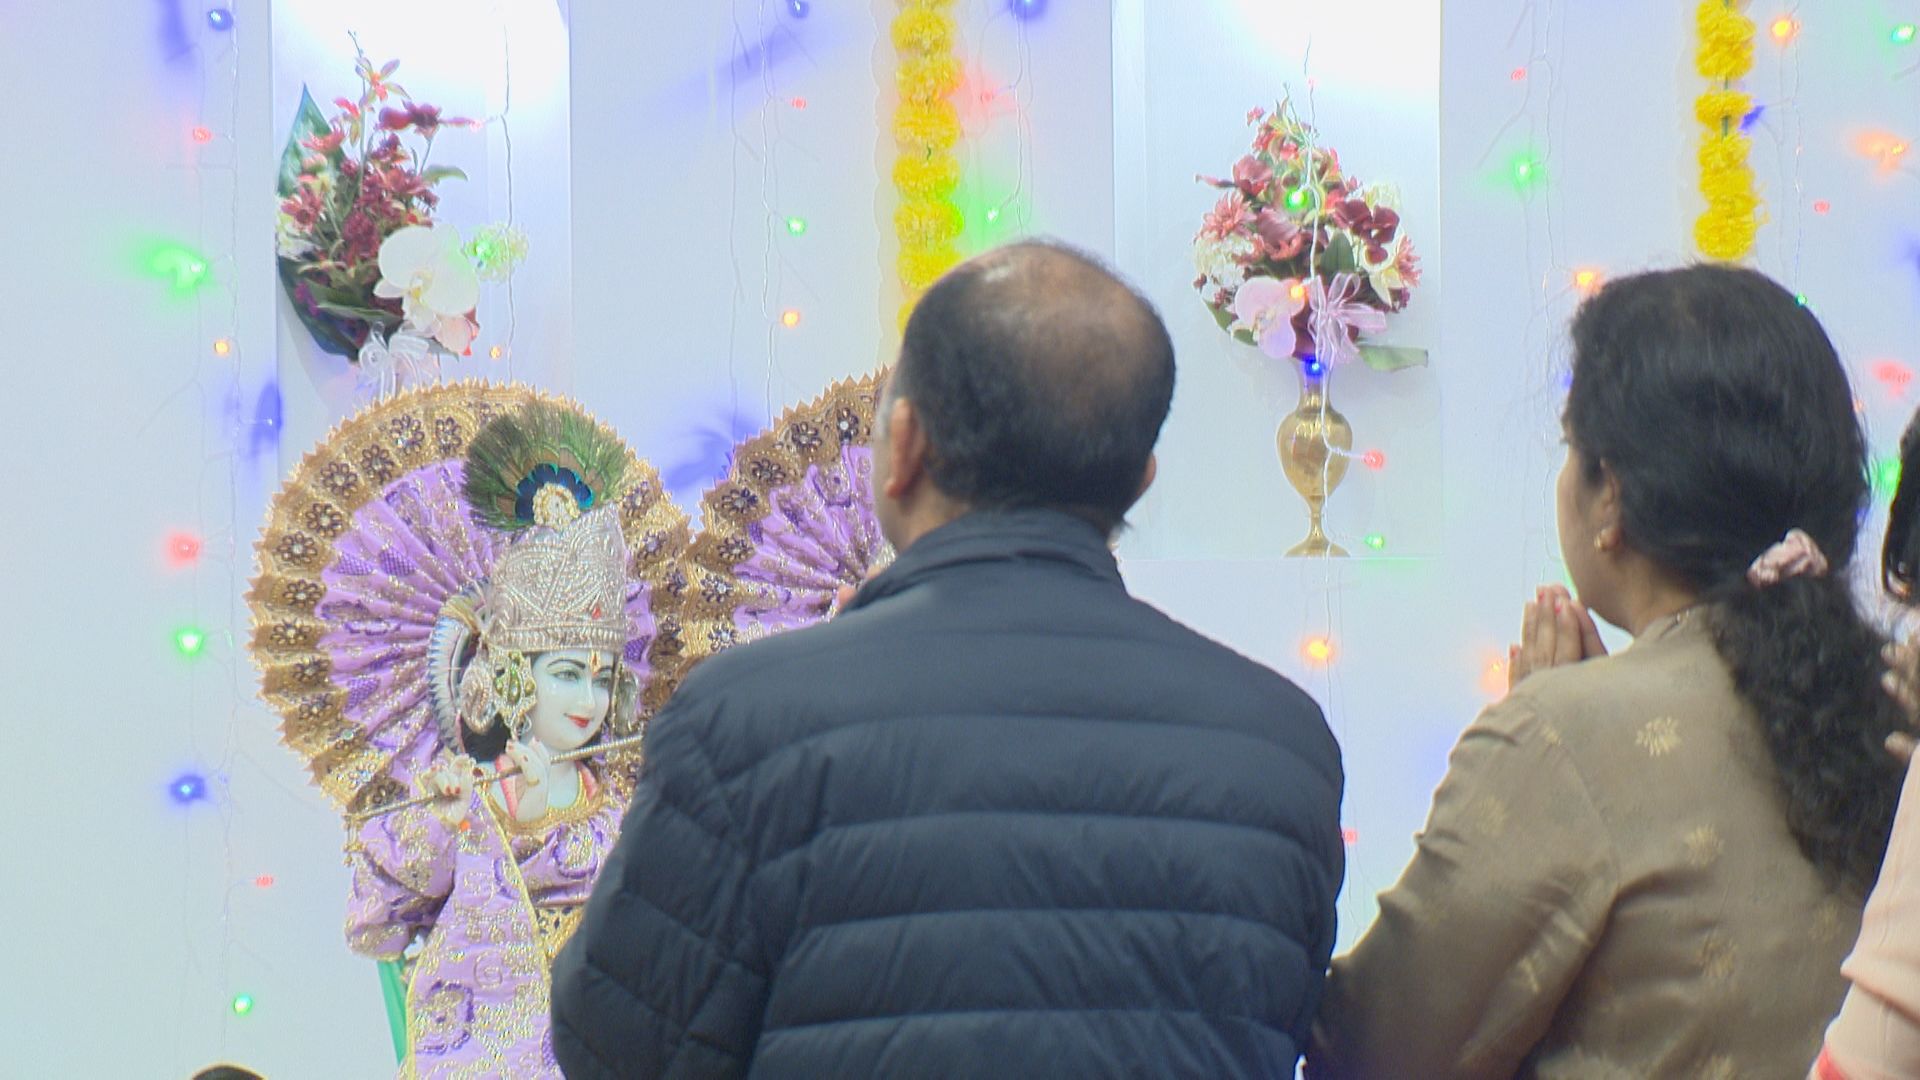 Regina Hindu Temple celebrated Diwali with message of light over darkness